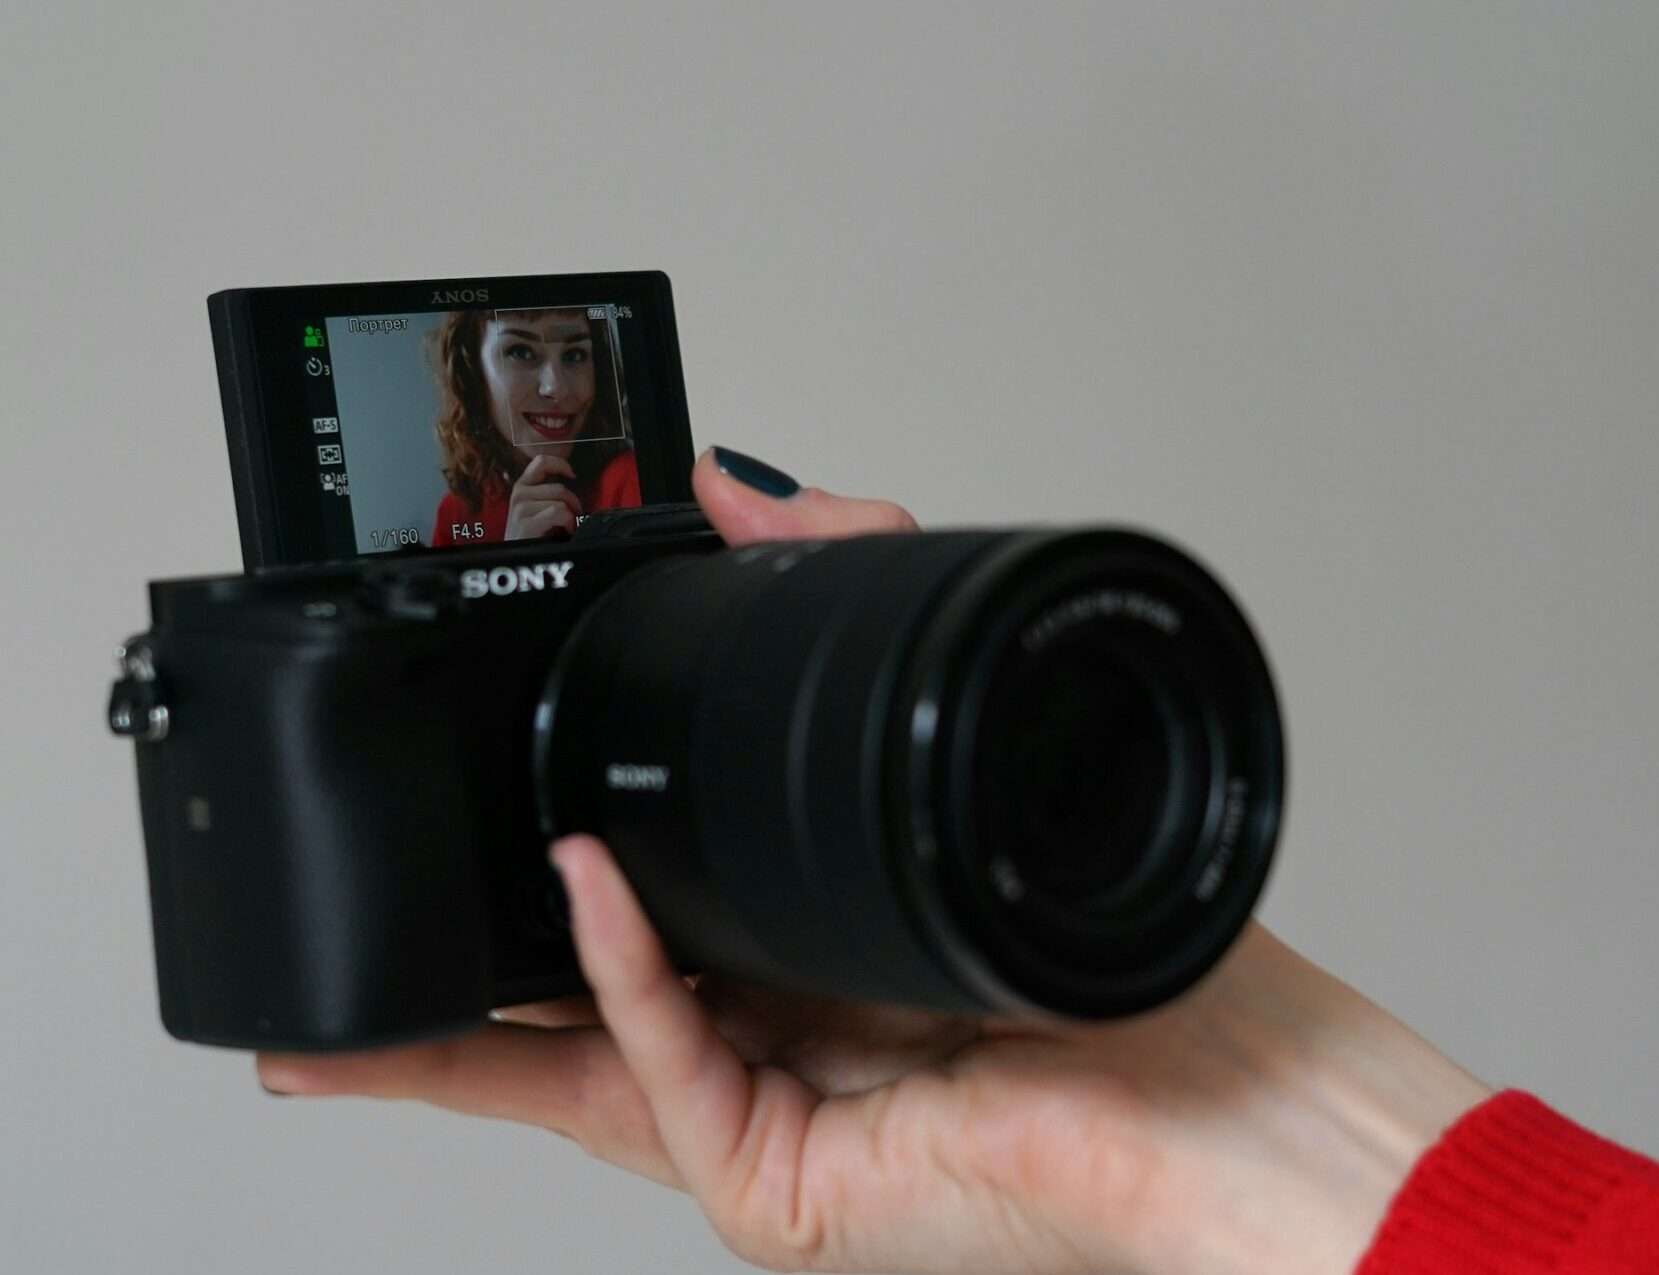 How to Use Sony a6100 as Webcam